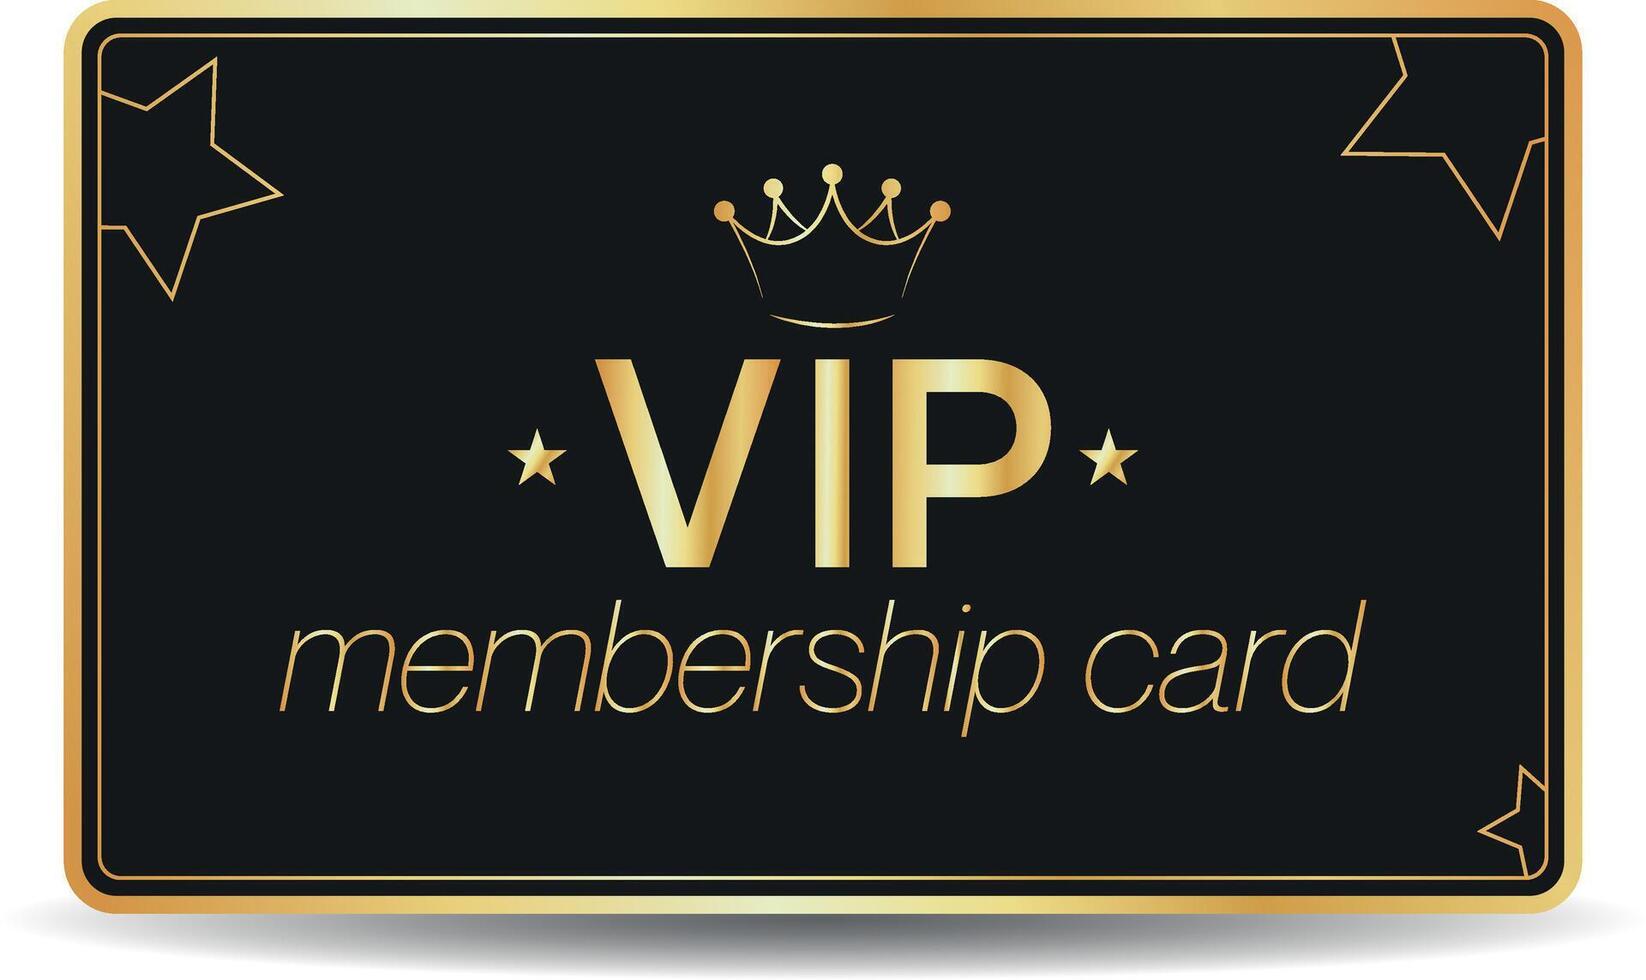 VIP membership card with gold elements vector